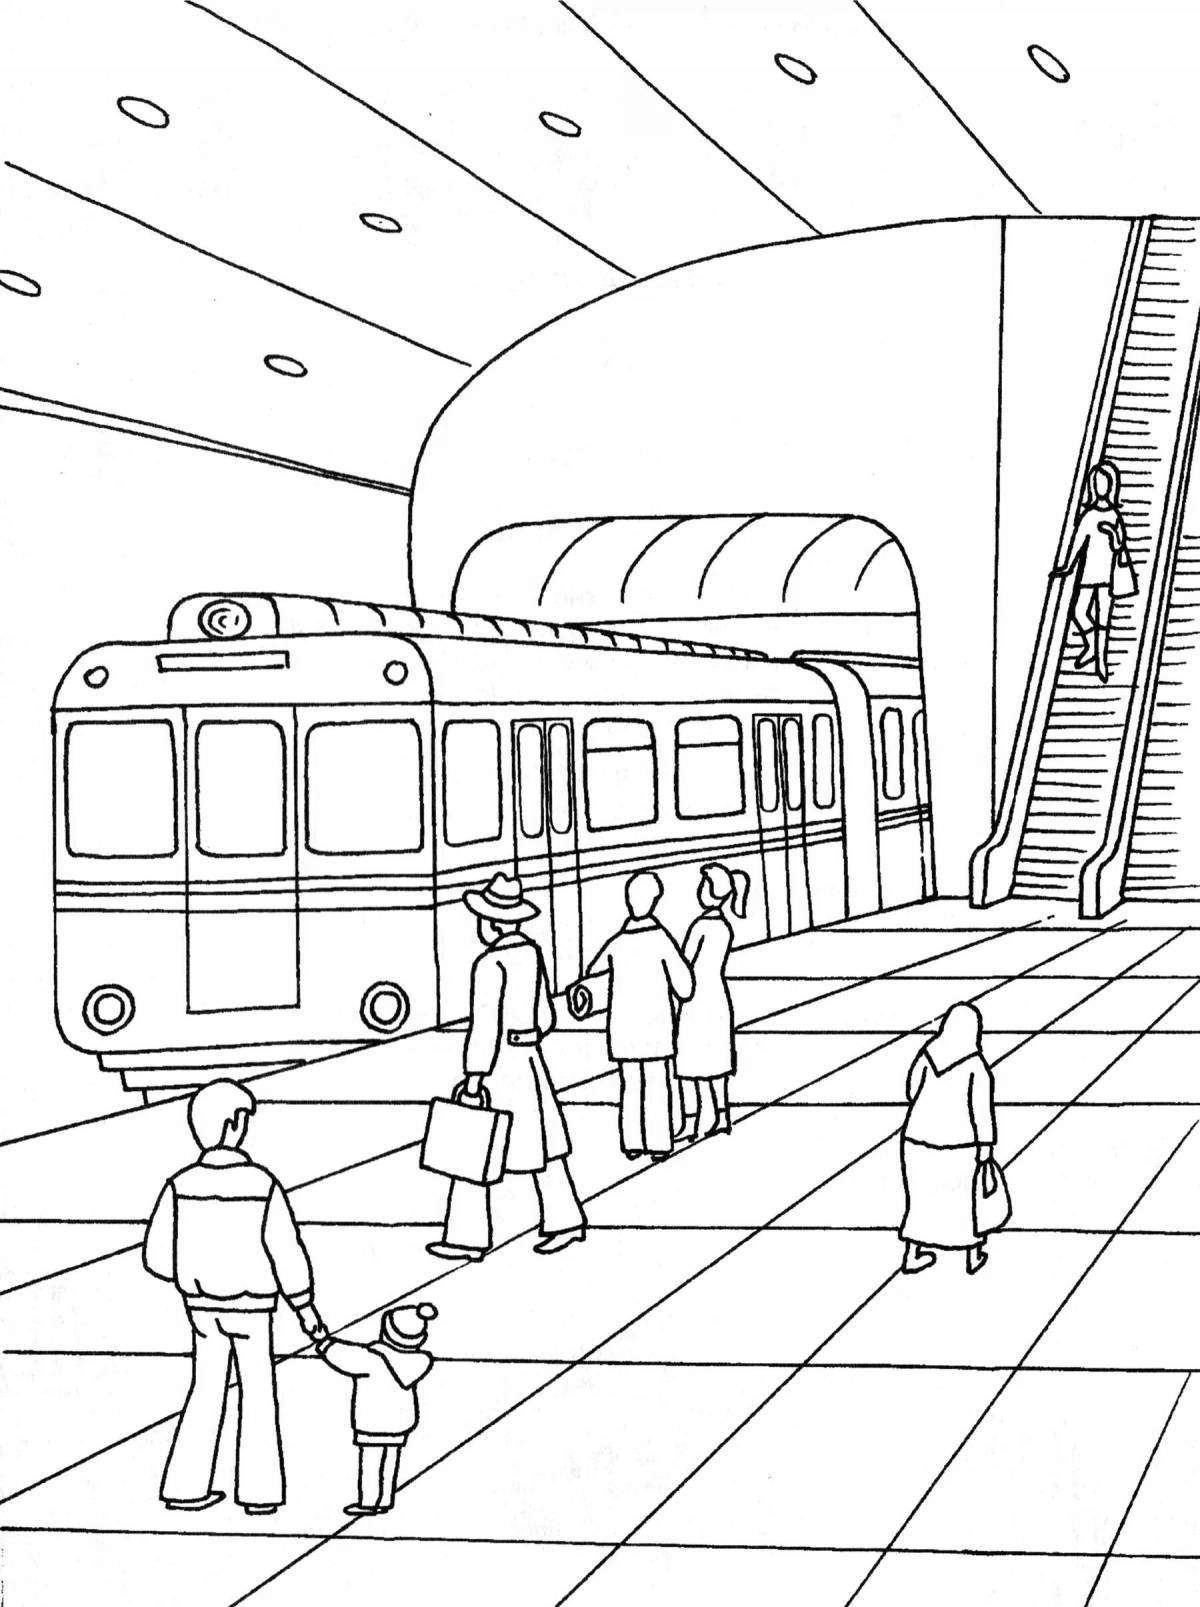 Detailed coloring of the Moscow metro